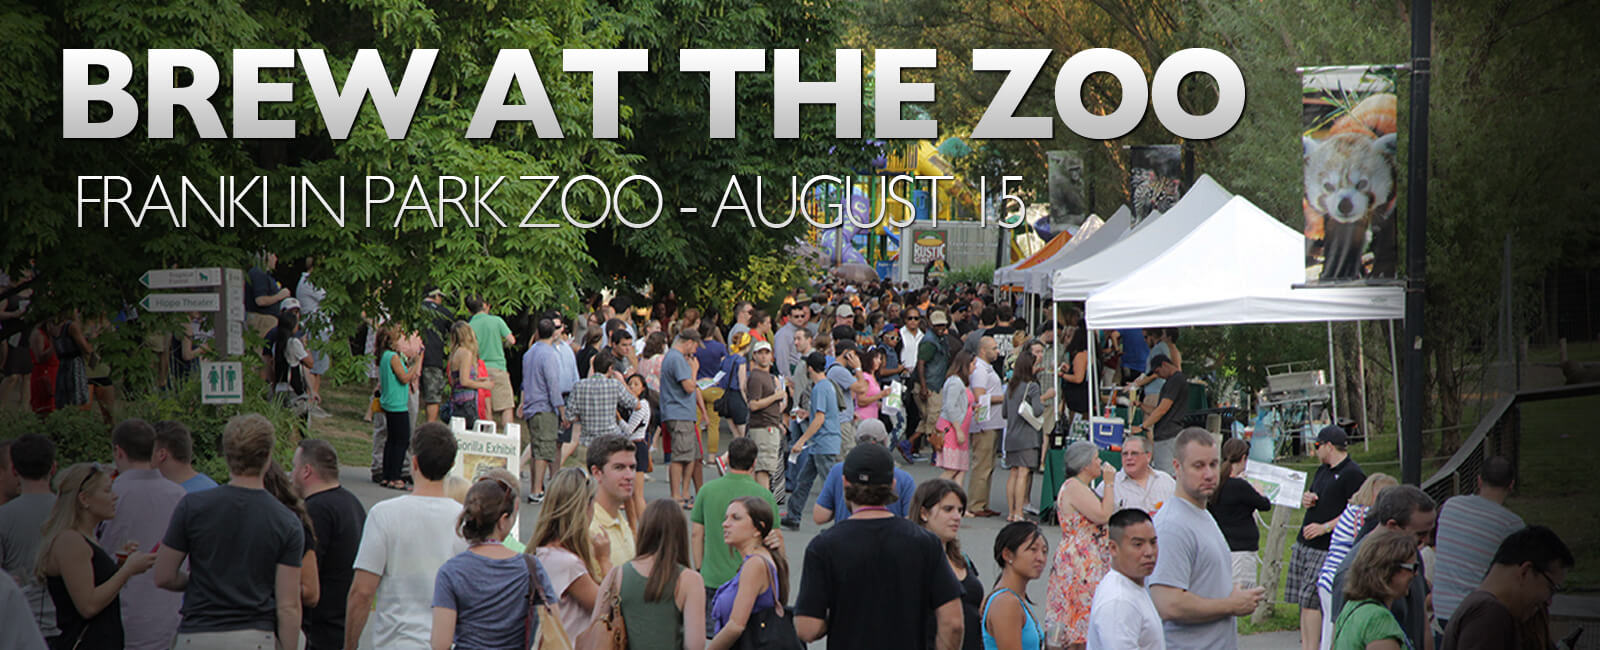 Brew at the Zoo 2015 Boston WeekendPick